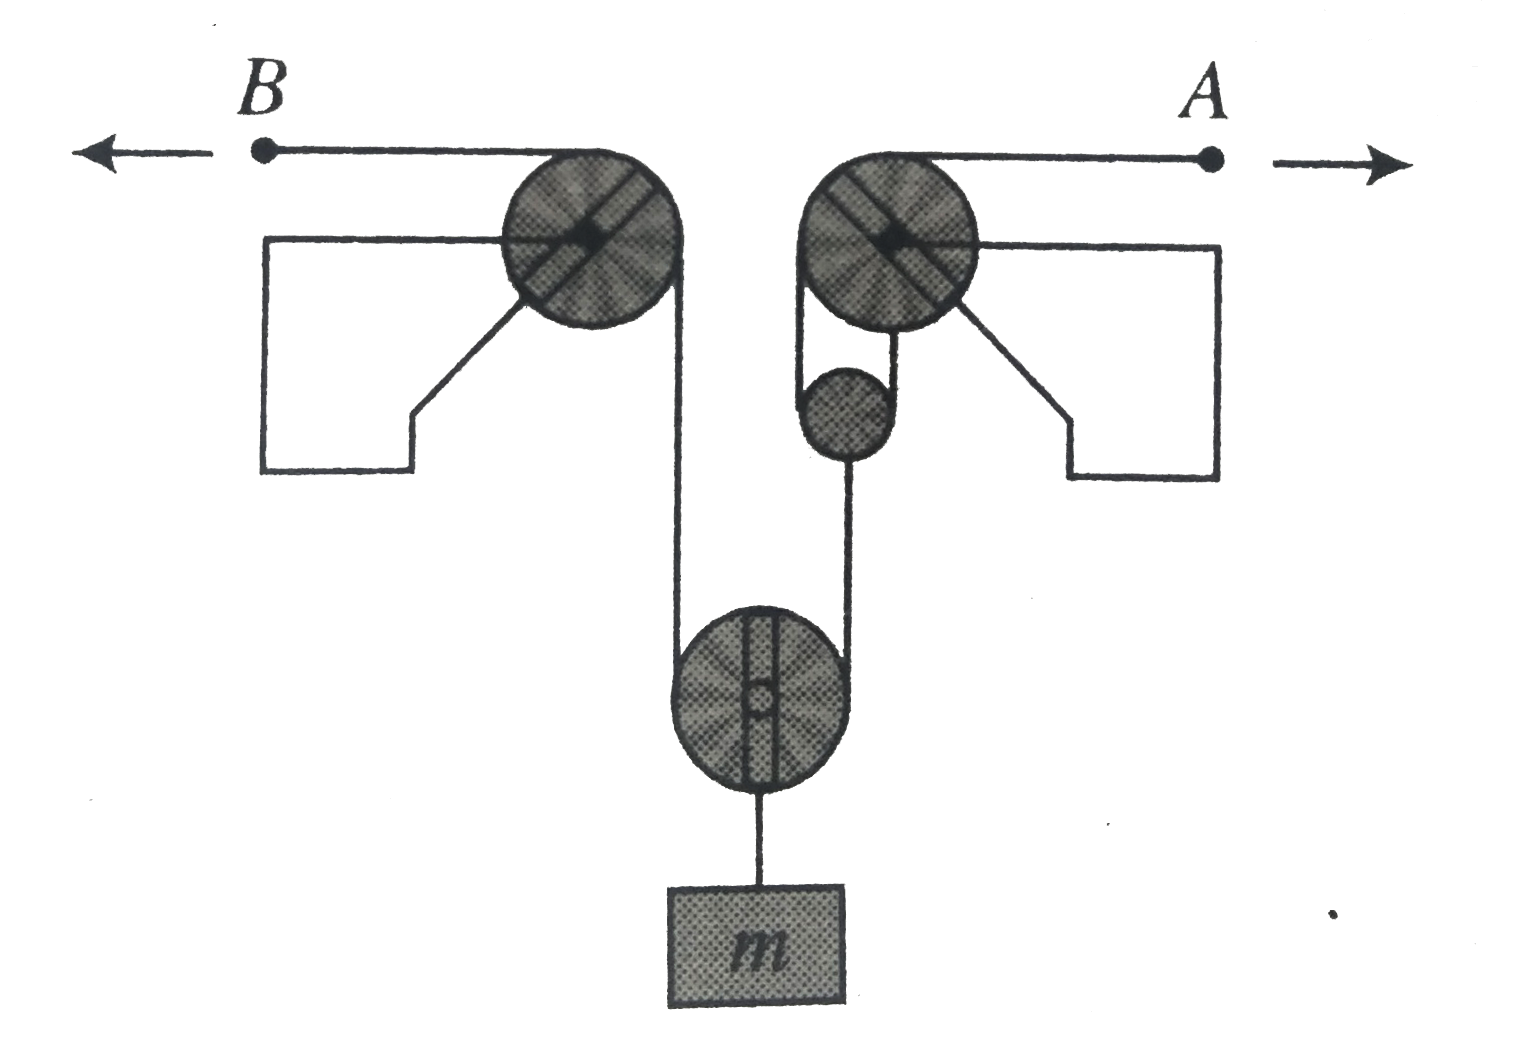 For the pulley system shown in fig. each of the cables at A and B is given a velocity of 2ms^(-1) in the direction of the arrow. Determine the upward velocity v of the load m.